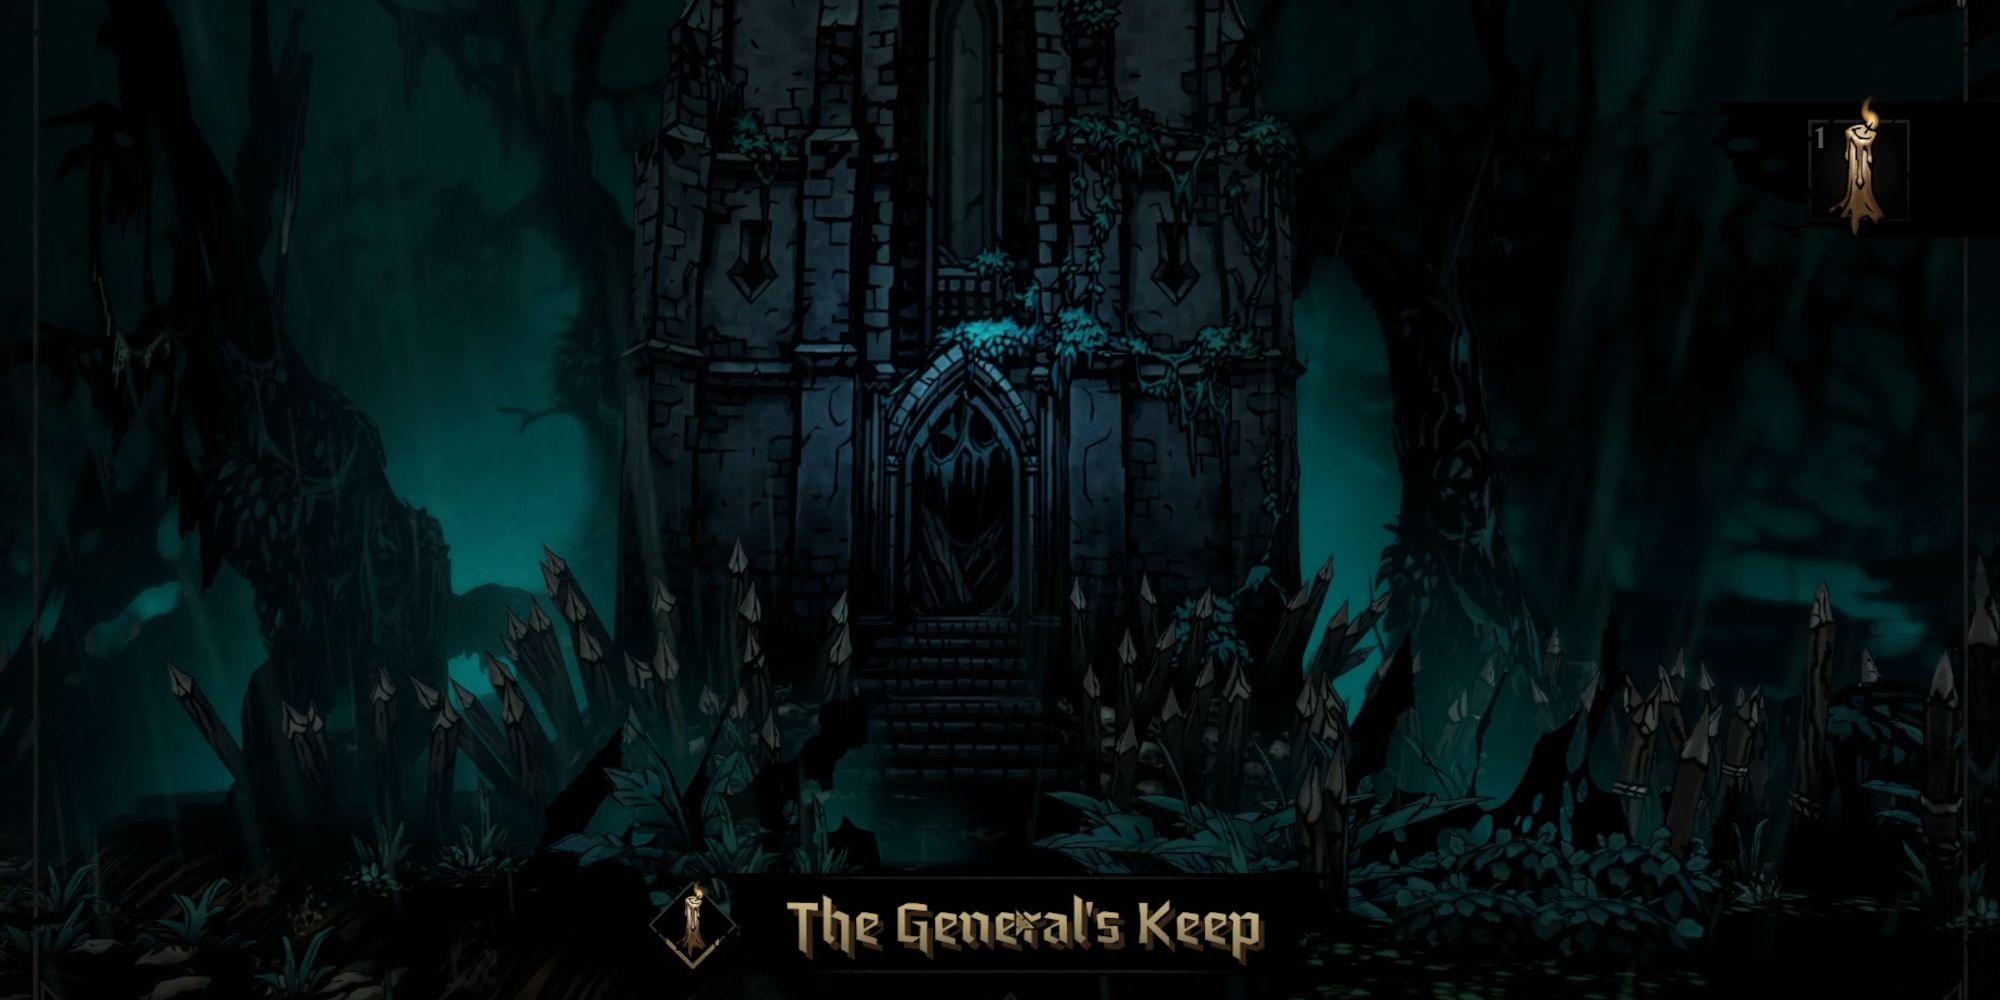 Entering the General's Keep in the Tangle in Darkest Dungeon 2